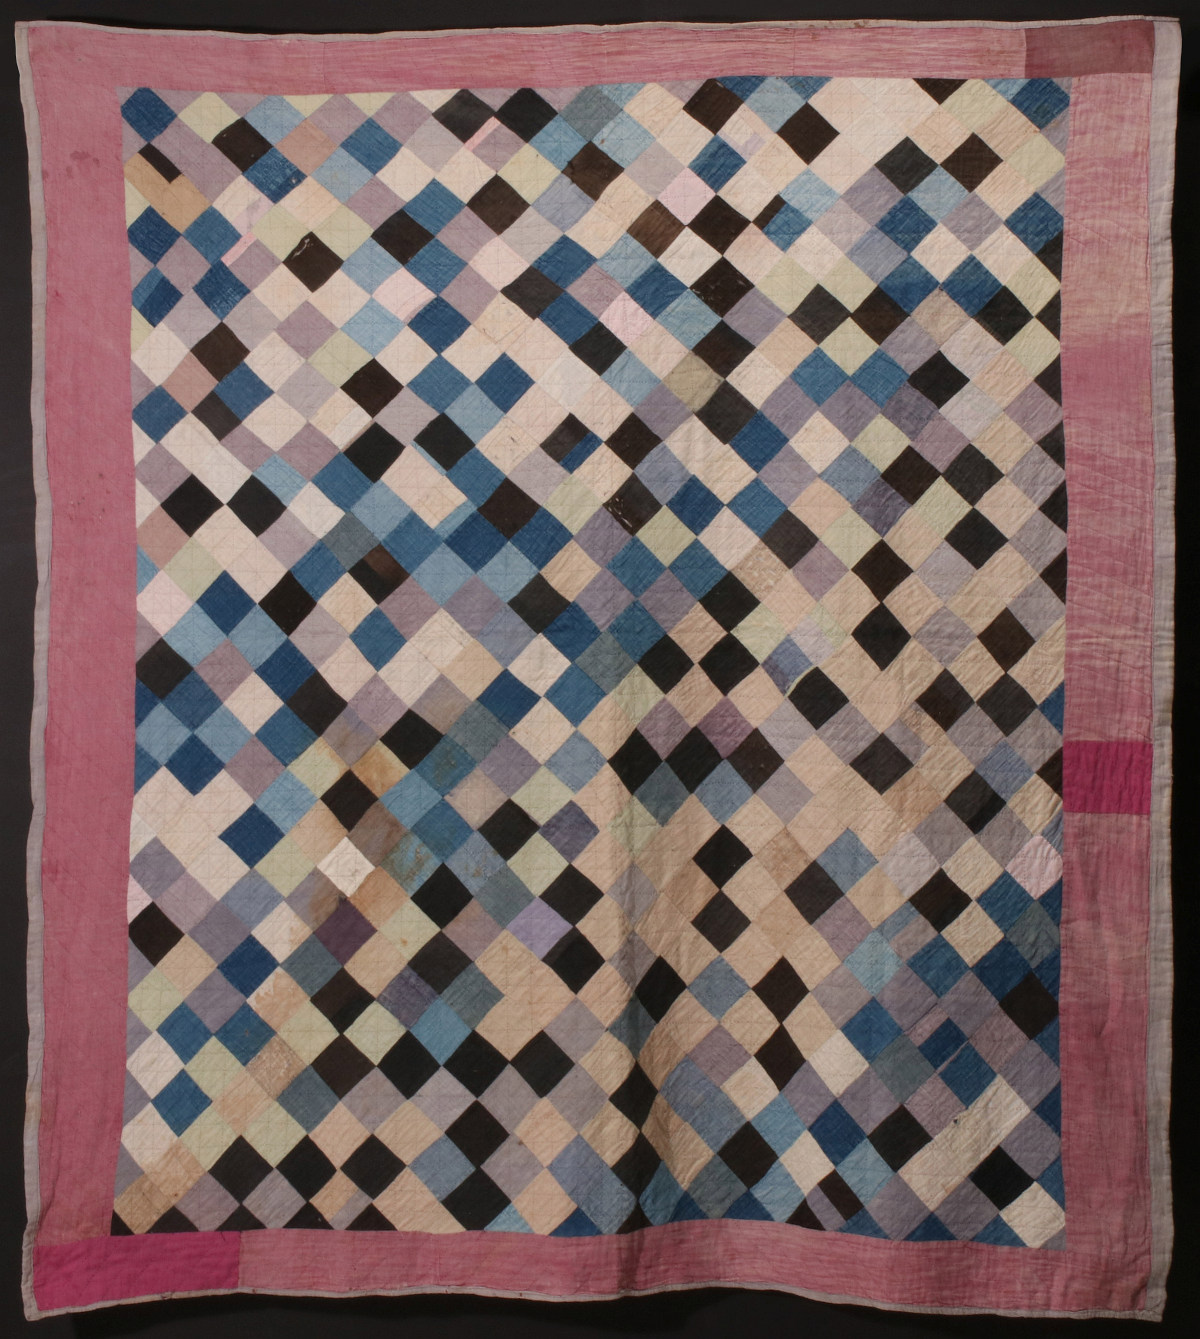 AN ANTIQUE AMISH POSTAGE STAMP PATCHWORK QUILT